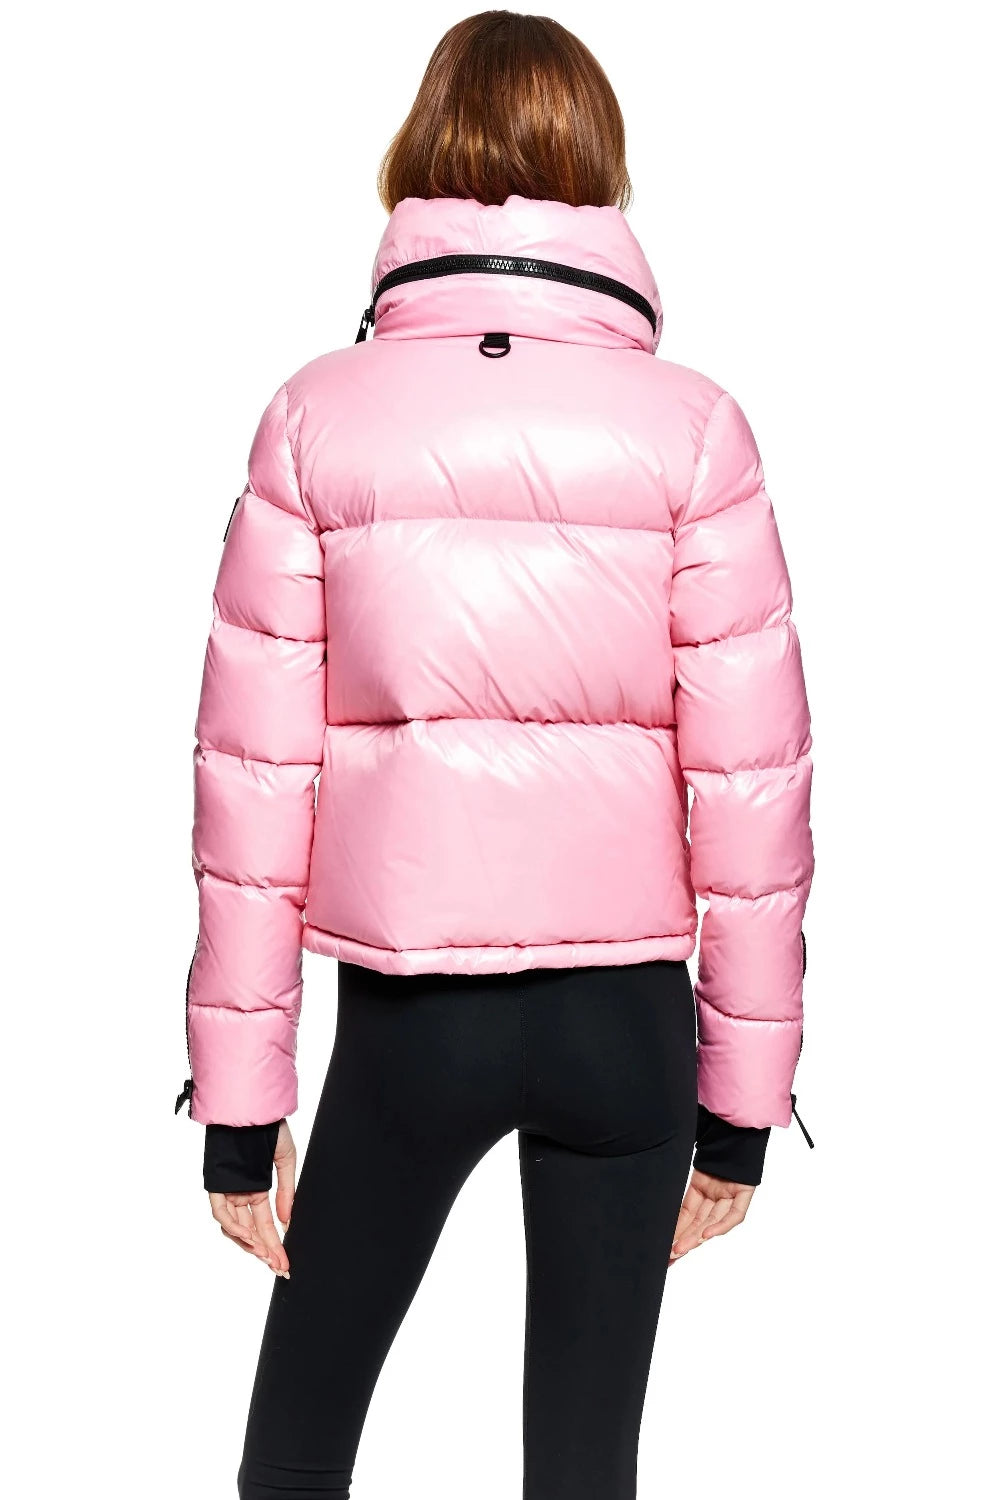 Marni Jacket in Bright Pink